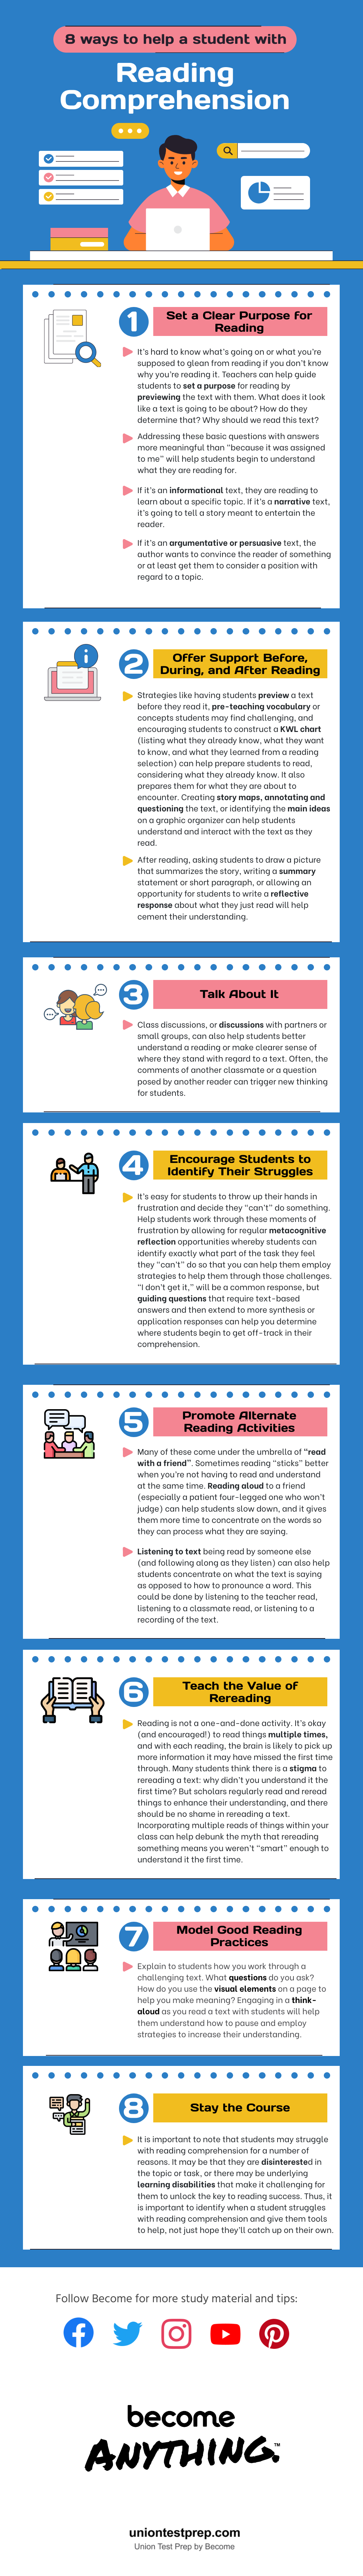 8 Ways to Help a Student with Reading Comprehension